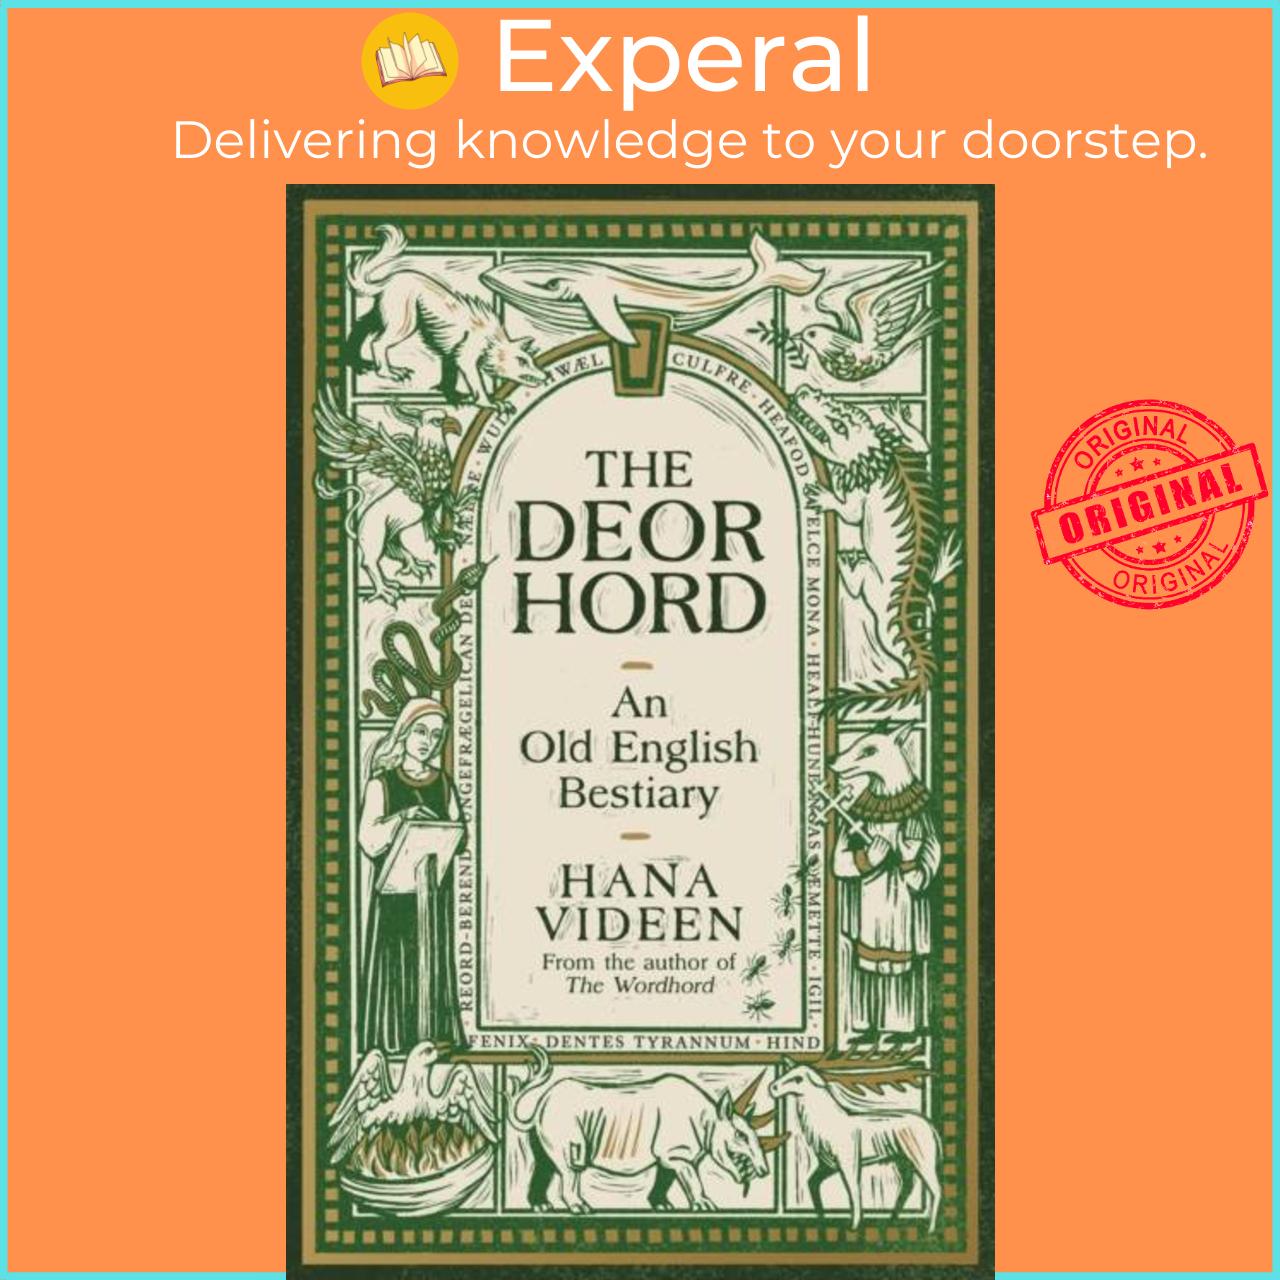 Sách - The Deorhord: An Old English Bestiary by Hana Videen (UK edition, hardcover)